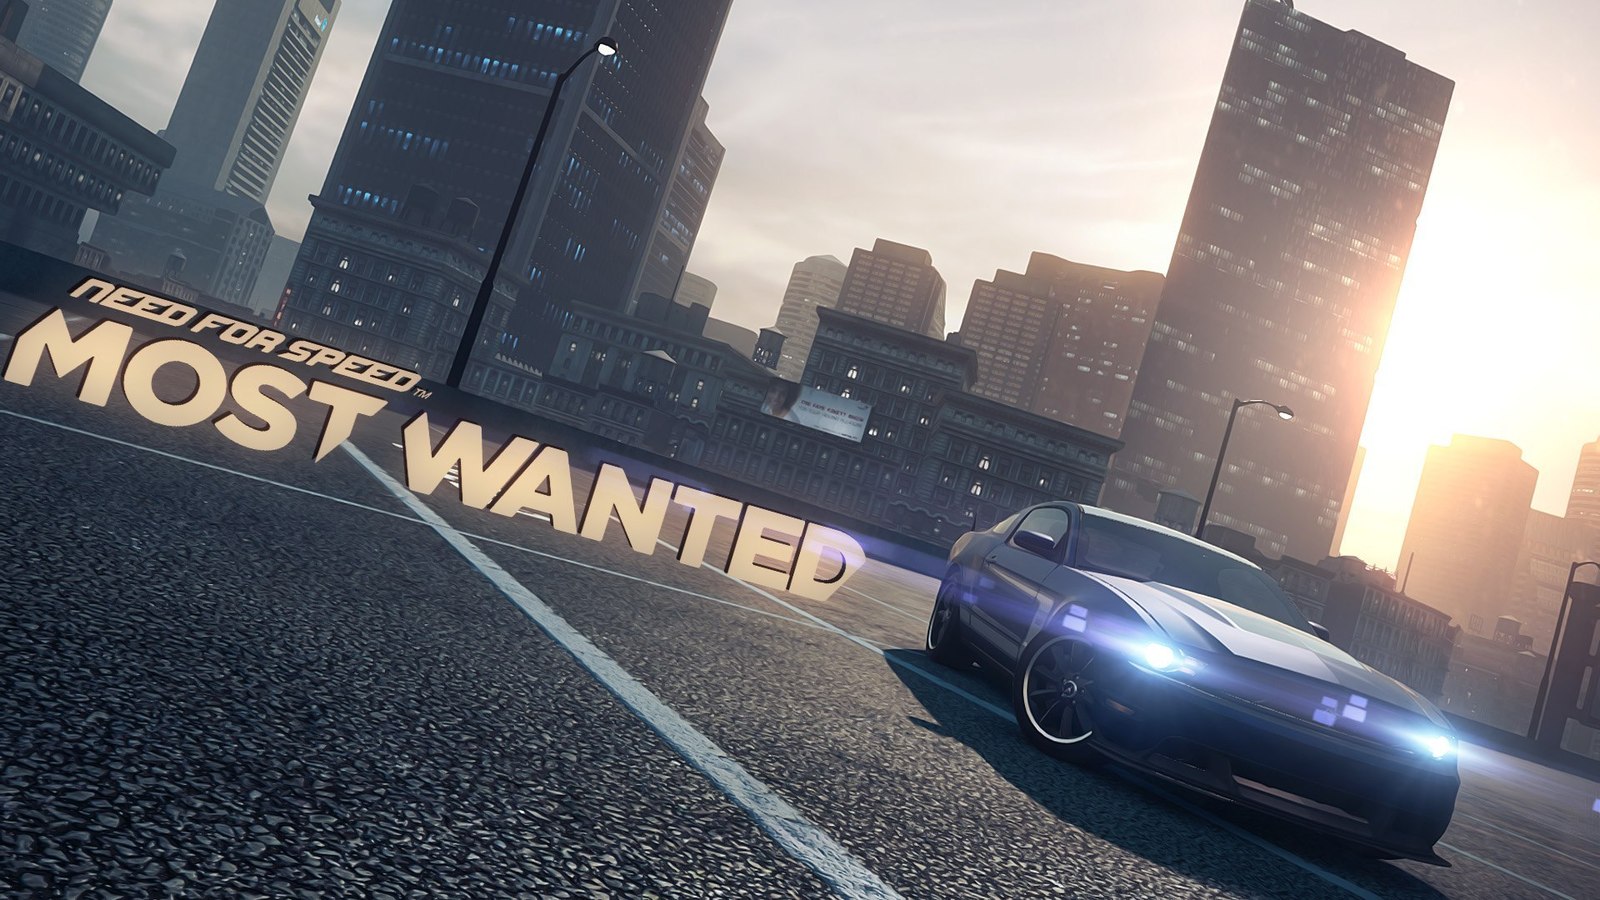 Nfs mw 2. Need for Speed most wanted 2. NFS most wanted 2012 Постер. NFS MW 2012 обложка. Галерея need for Speed: most wanted 2012.